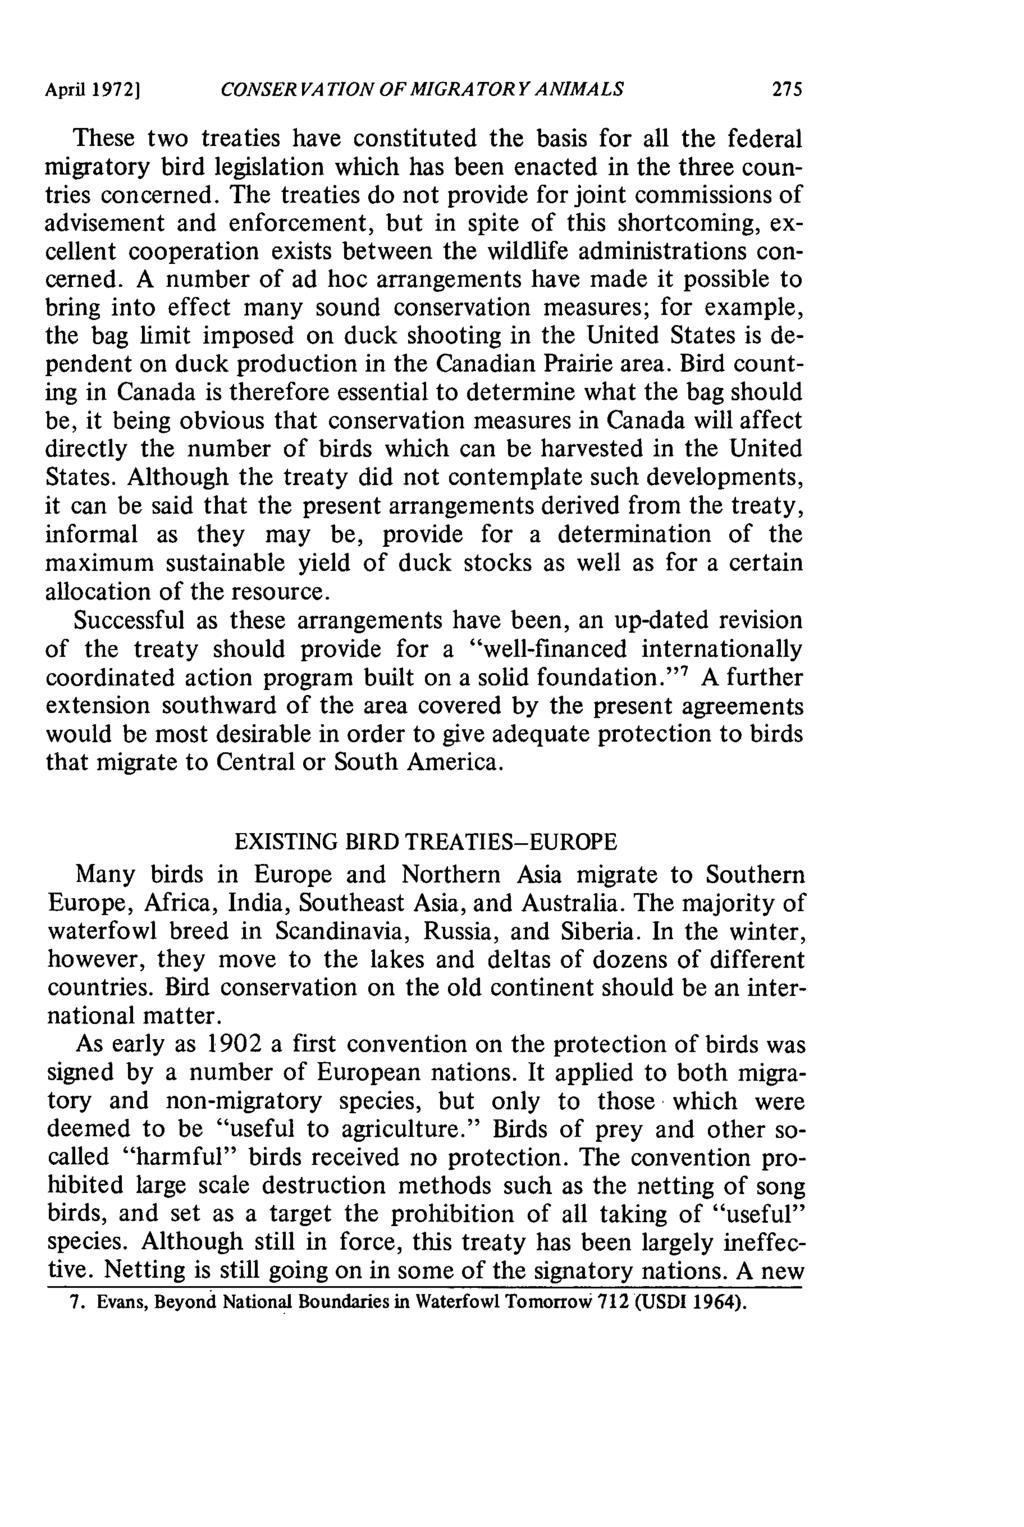 April 19721 CONSER VA TION OF MIGRA TORY ANIMALS These two treaties have constituted the basis for all the federal migratory bird legislation which has been enacted in the three countries concerned.